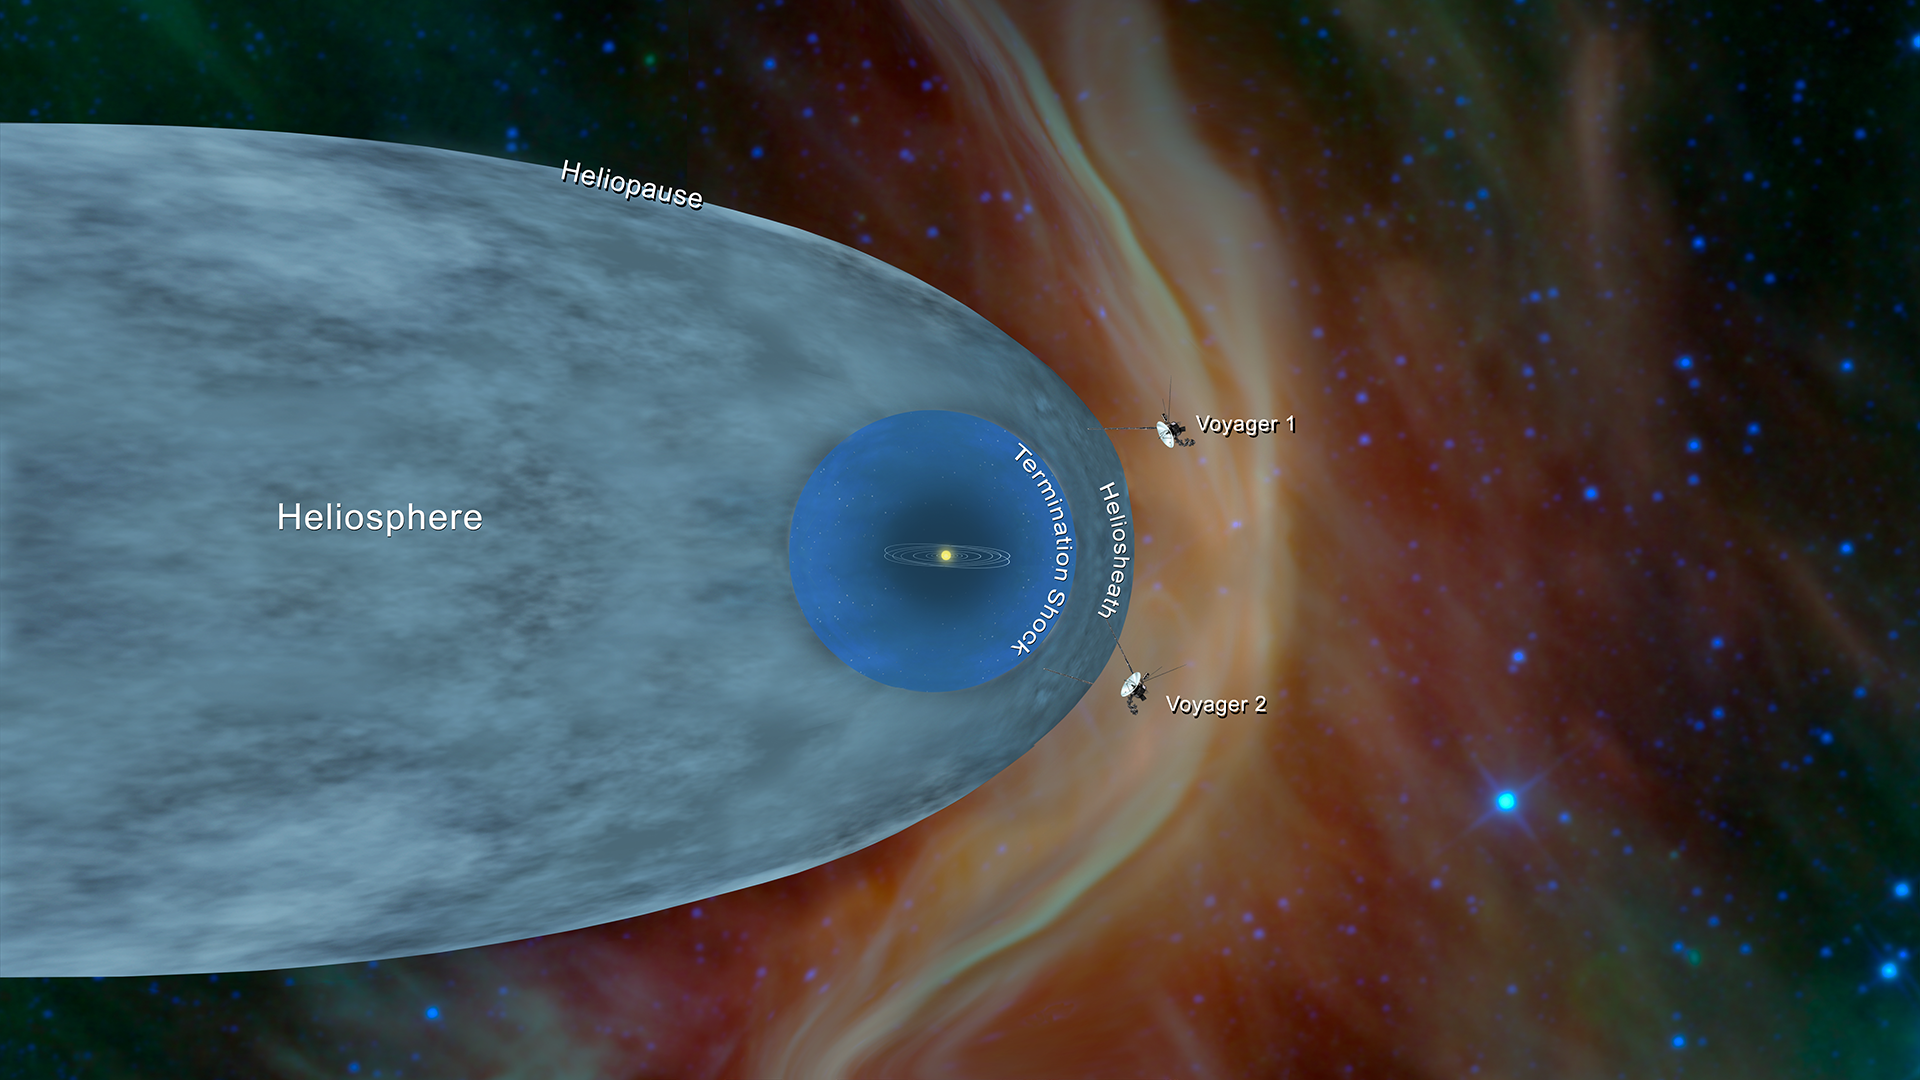 illustration shows the positions of NASA’s Voyager 1 and Voyager 2 probes outside the heliosphere, the region surrounding our star, beyond which interstellar space begins